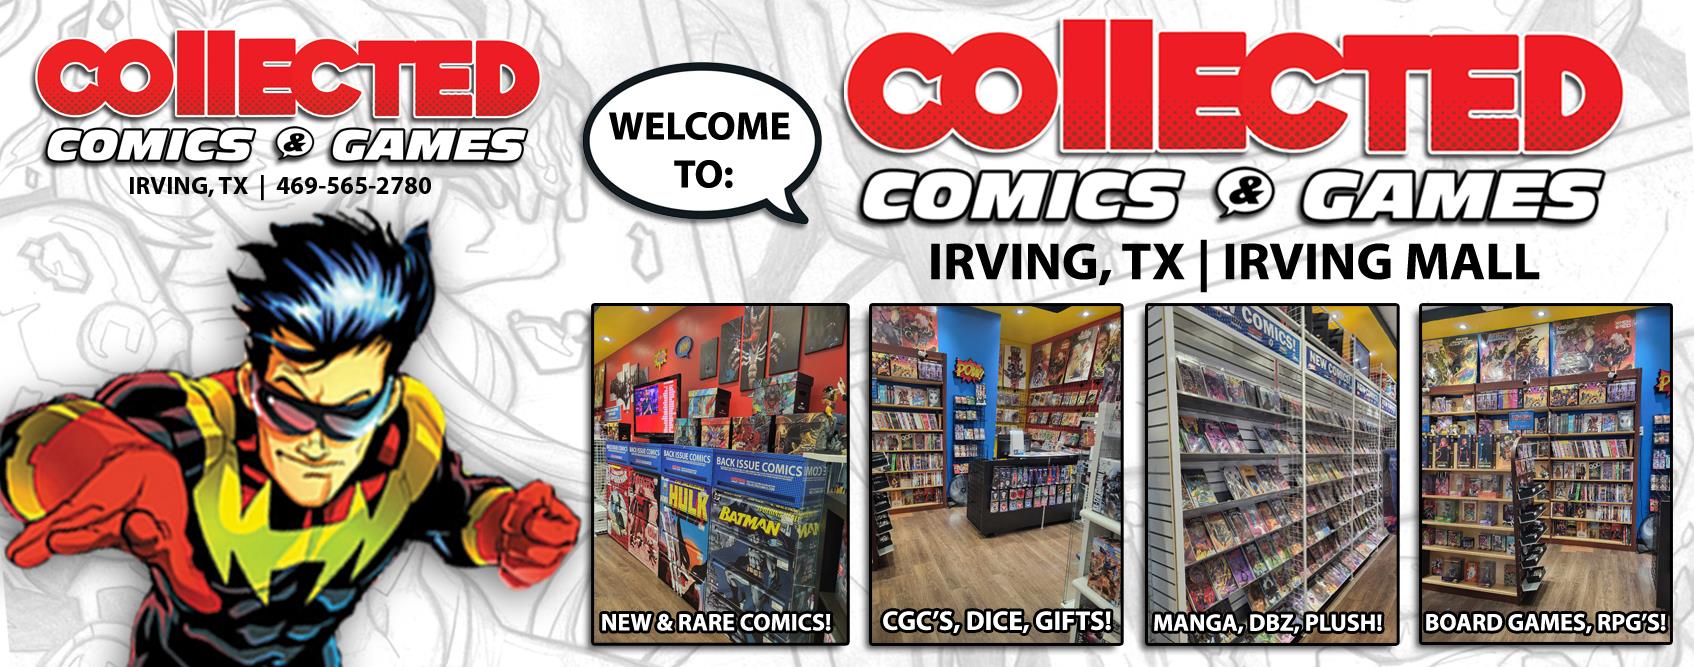 Collected Comics & Games: Irving Banner